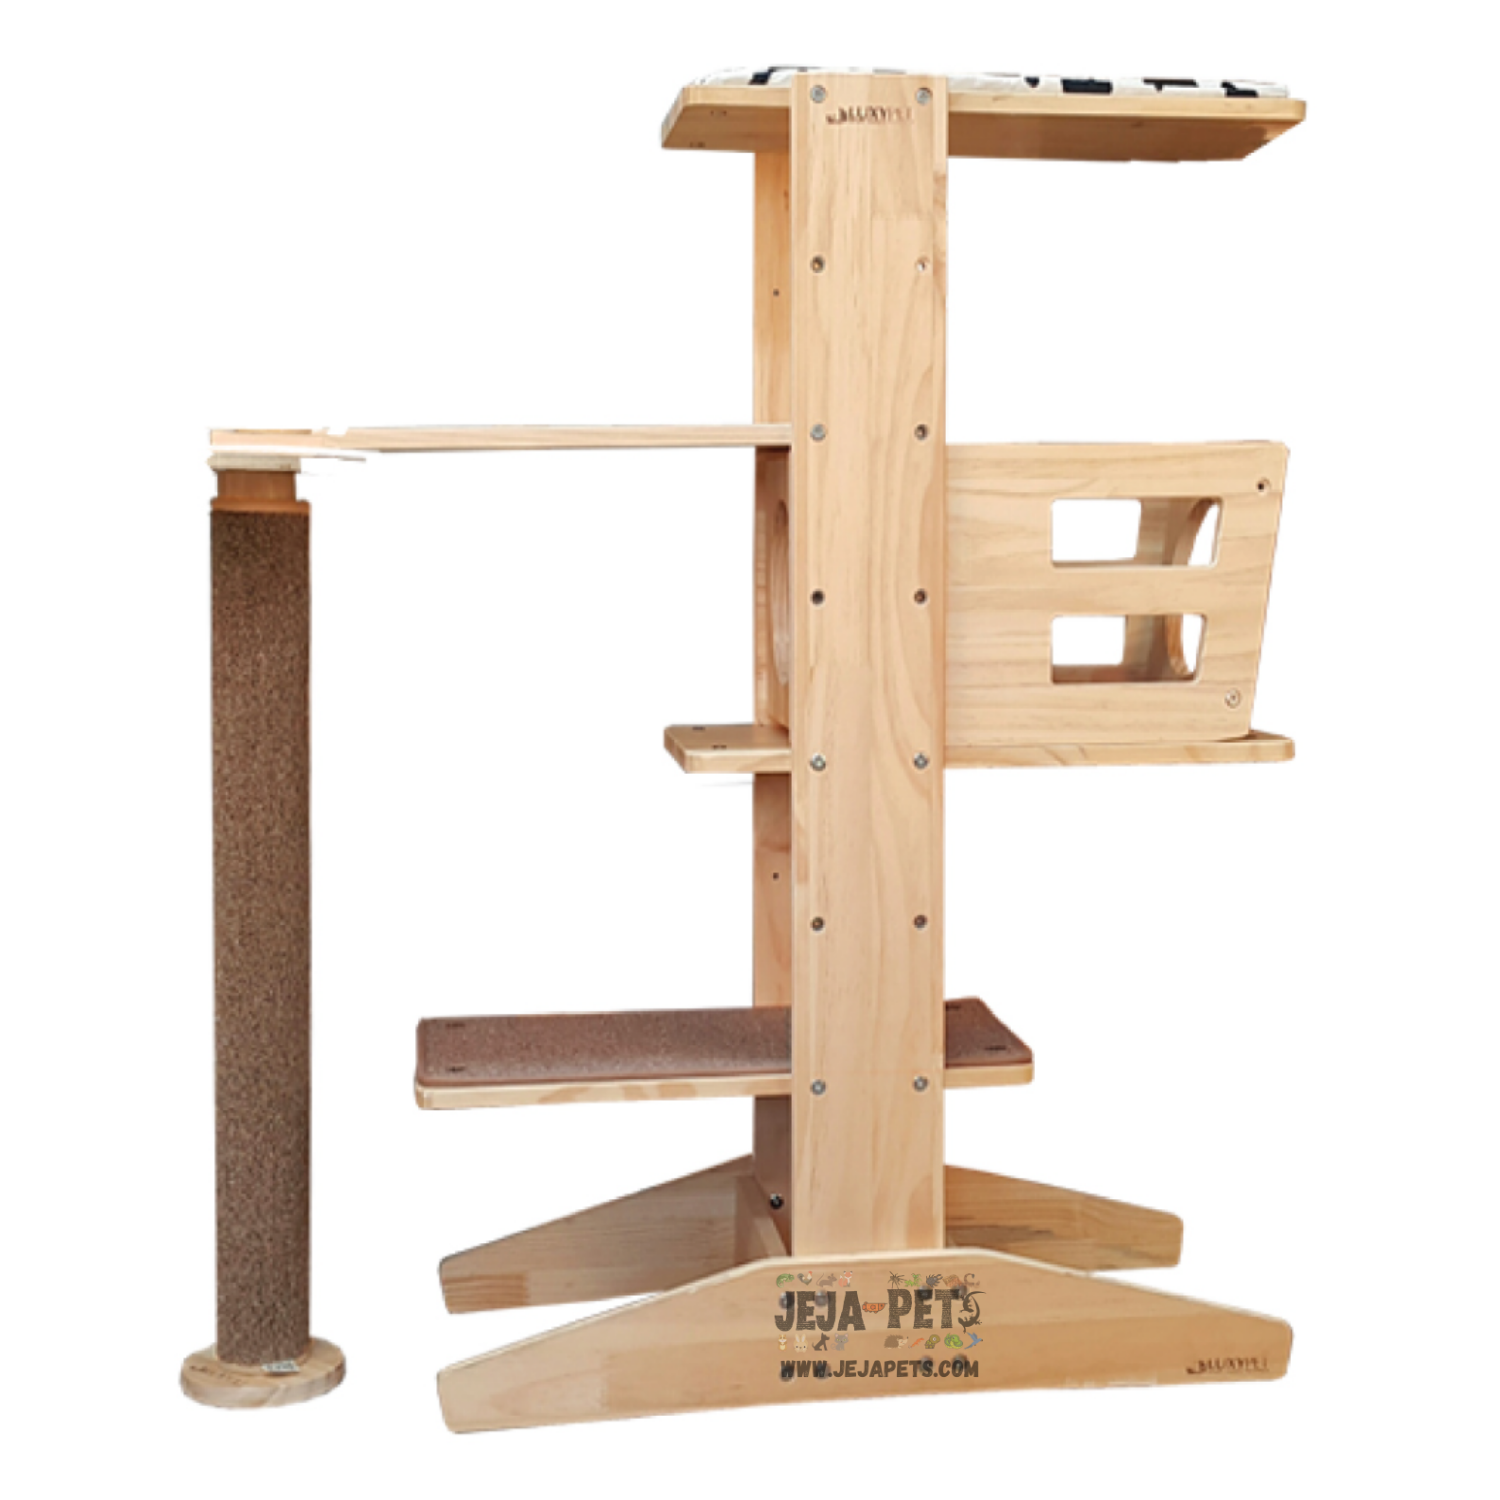 [DISCONTINUED] Luxypet Aaron 3-3 Tower Set 1 Basic Cat Condo - 76 x 34 x 115 cm